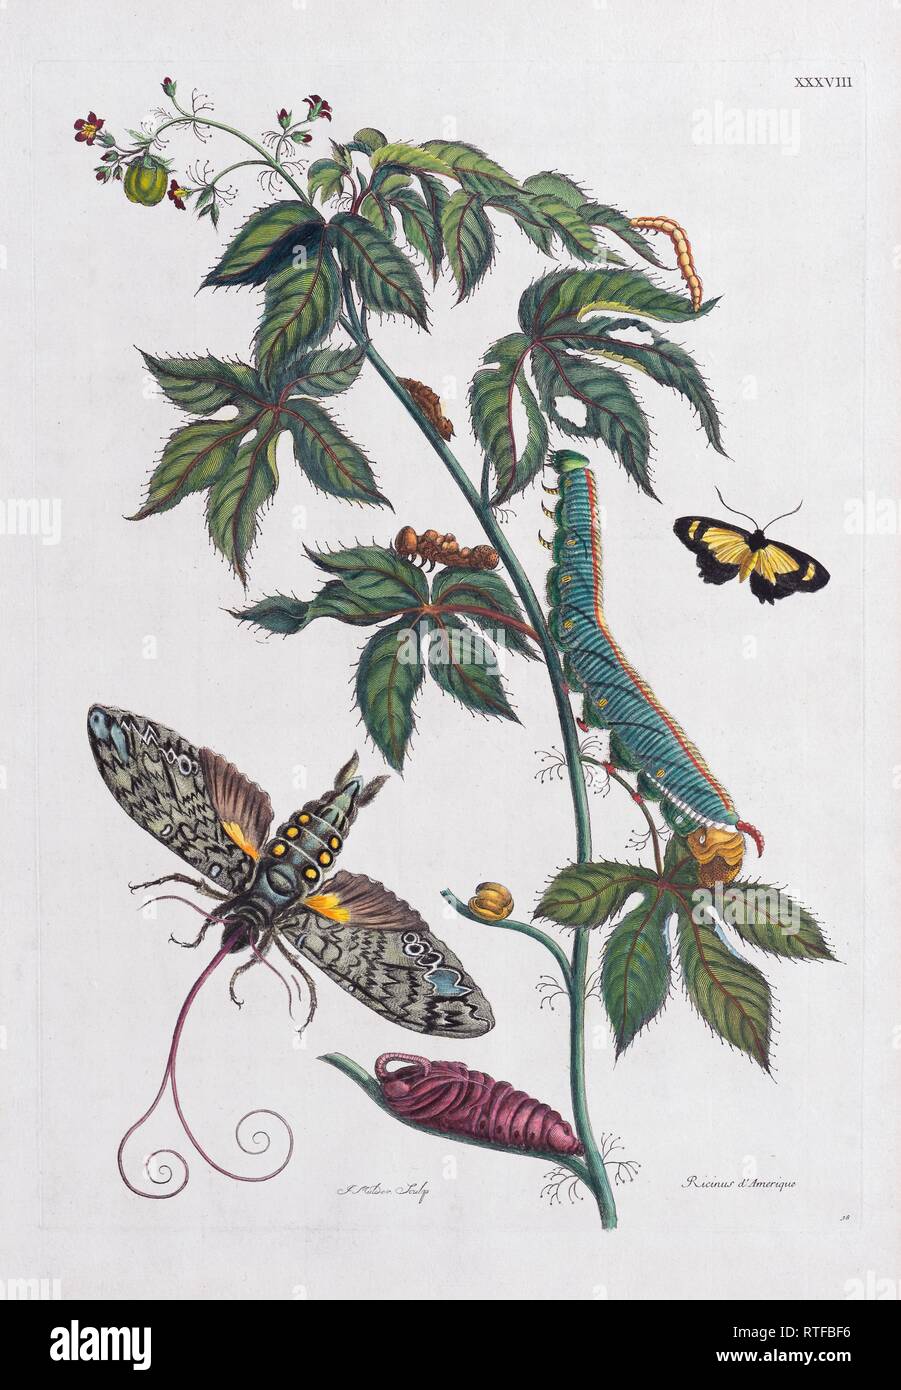 Owlet moth (Noctuidae), Transformation, hand coloured copper engraving by Maria Sybilla Merian from Metamorphosis insectorum Stock Photo